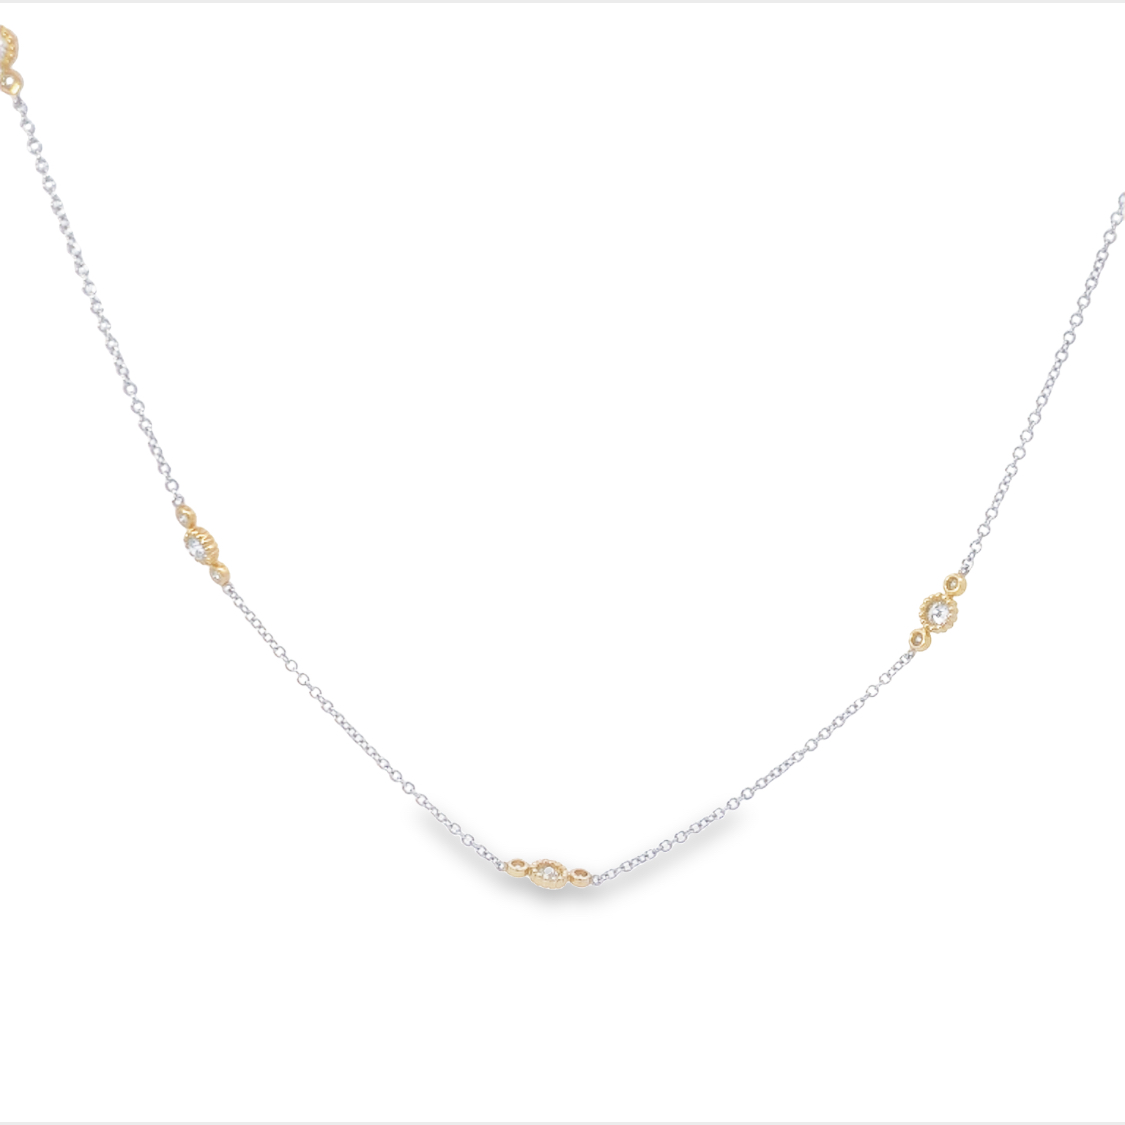 14K White and Yellow Gold Diamond Station Necklace